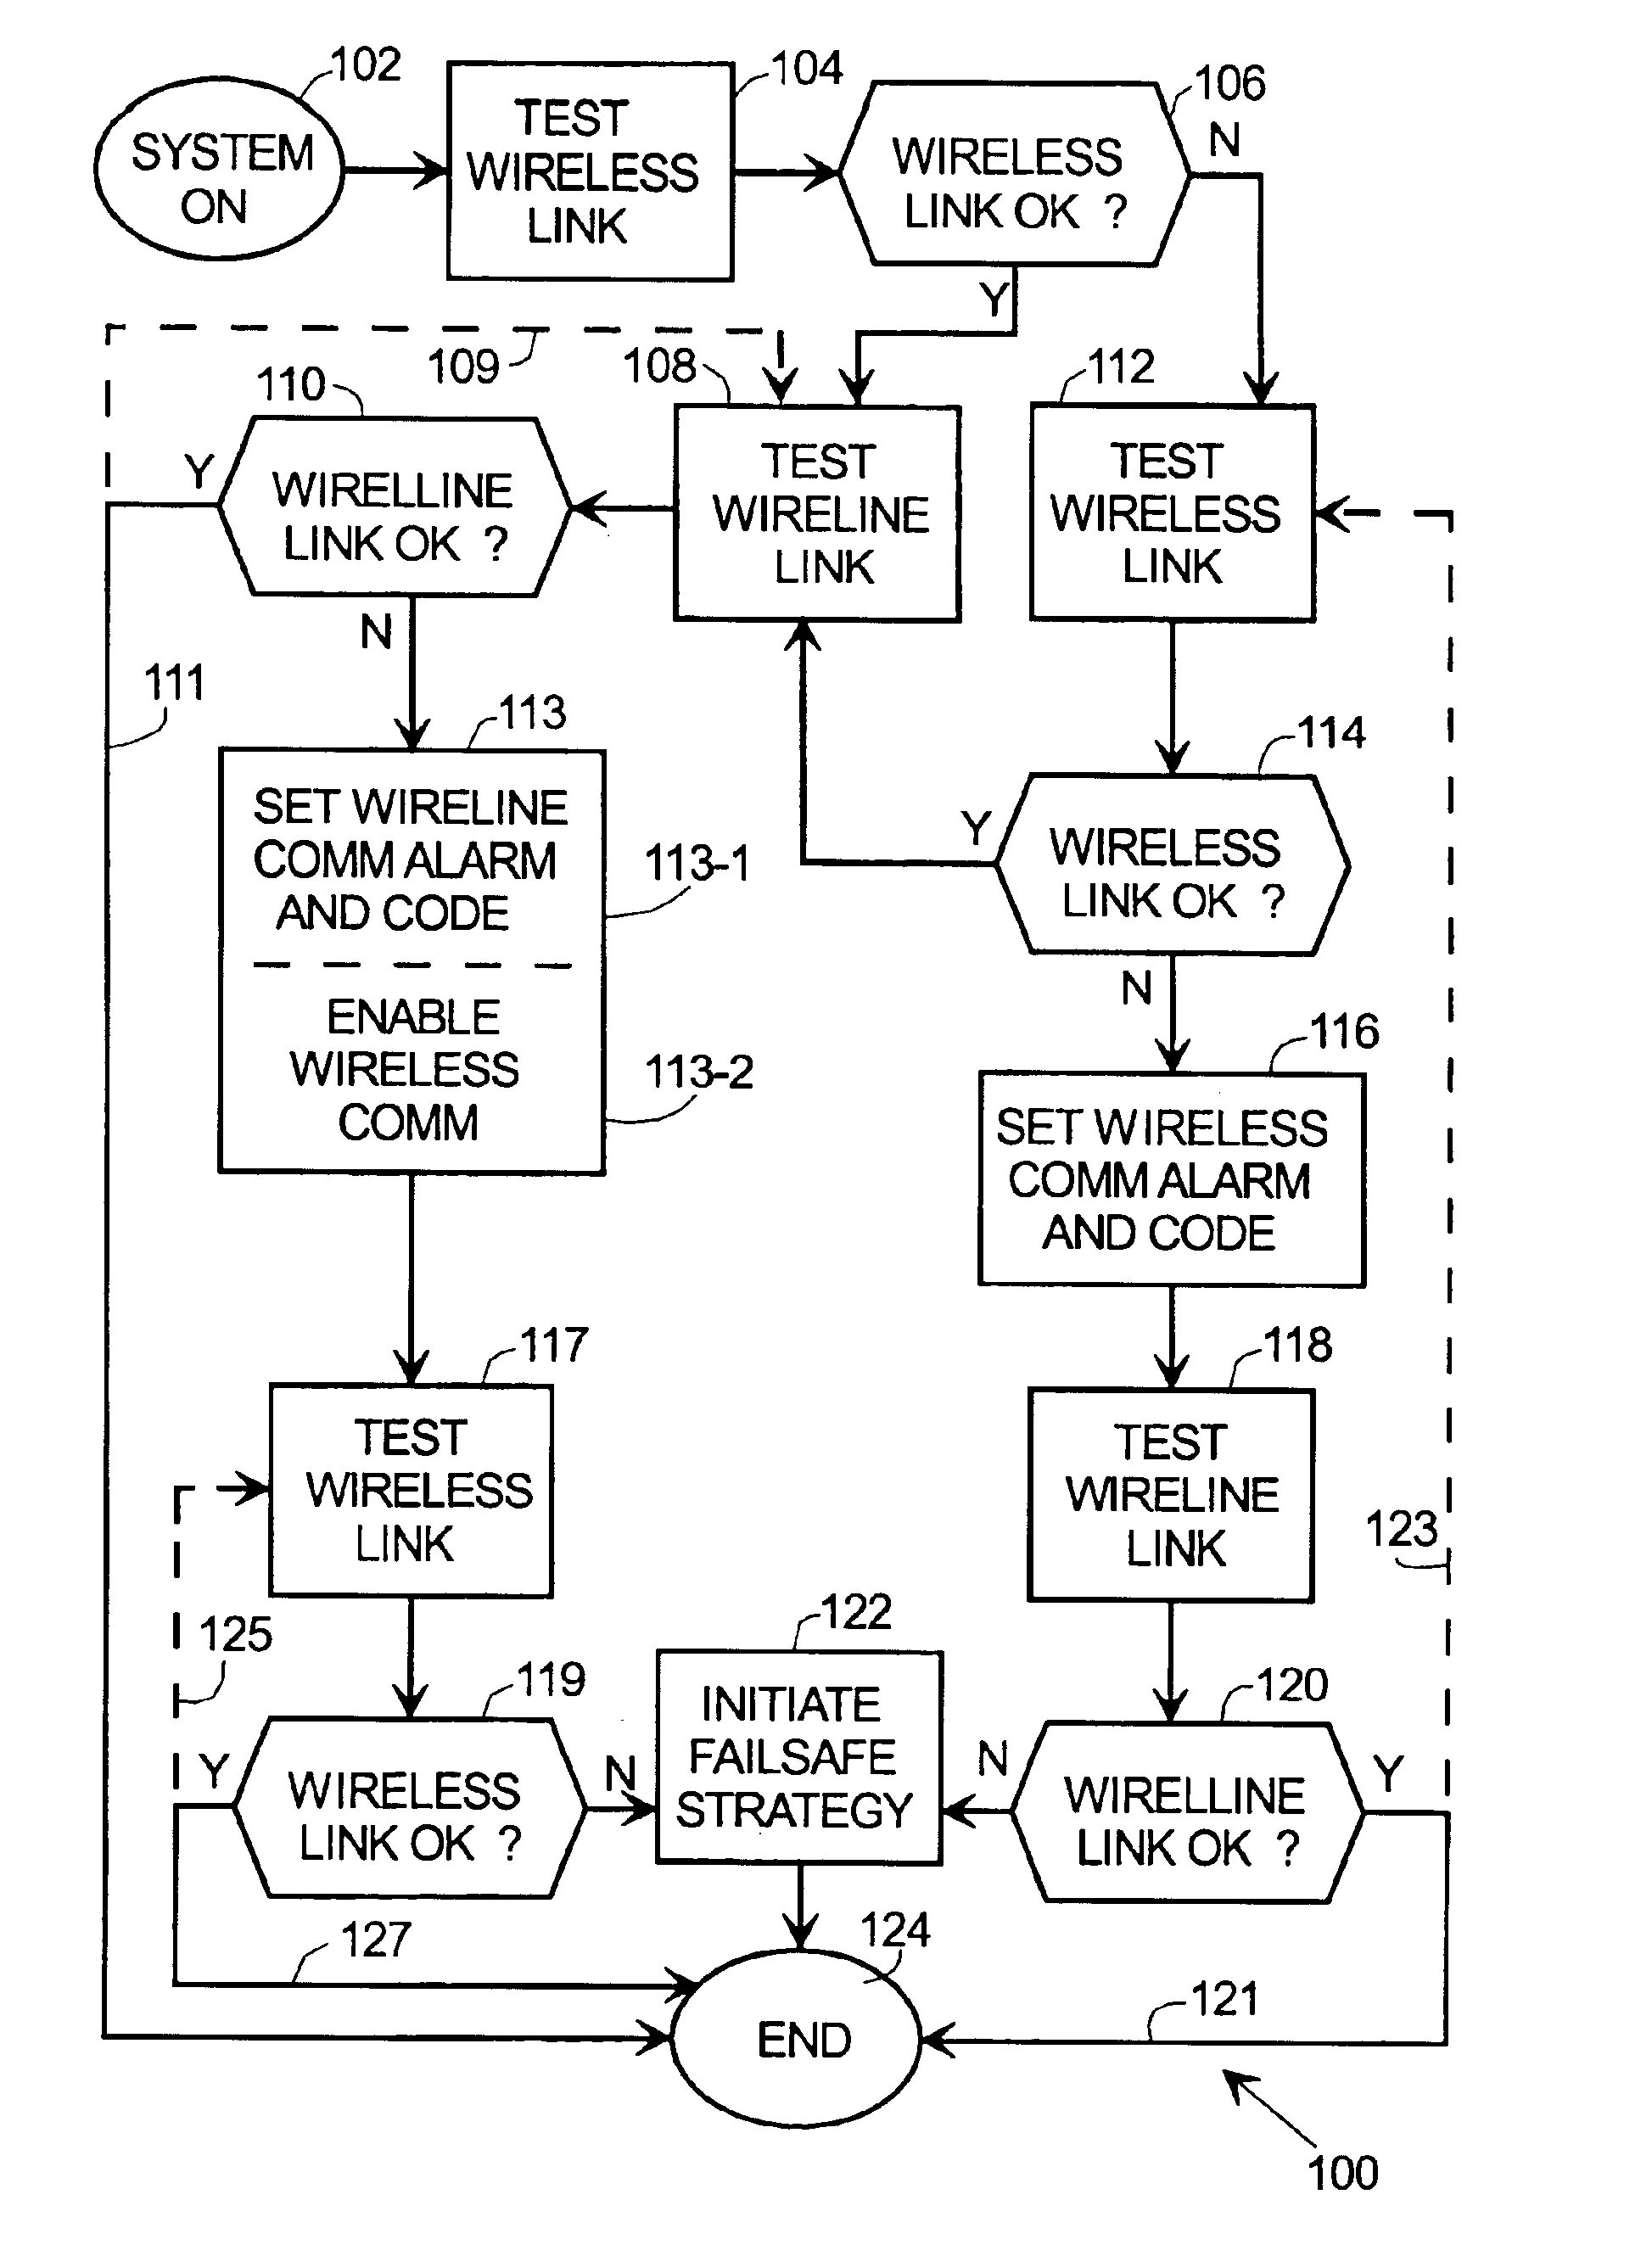 Wireless backup communication link for vehicle control